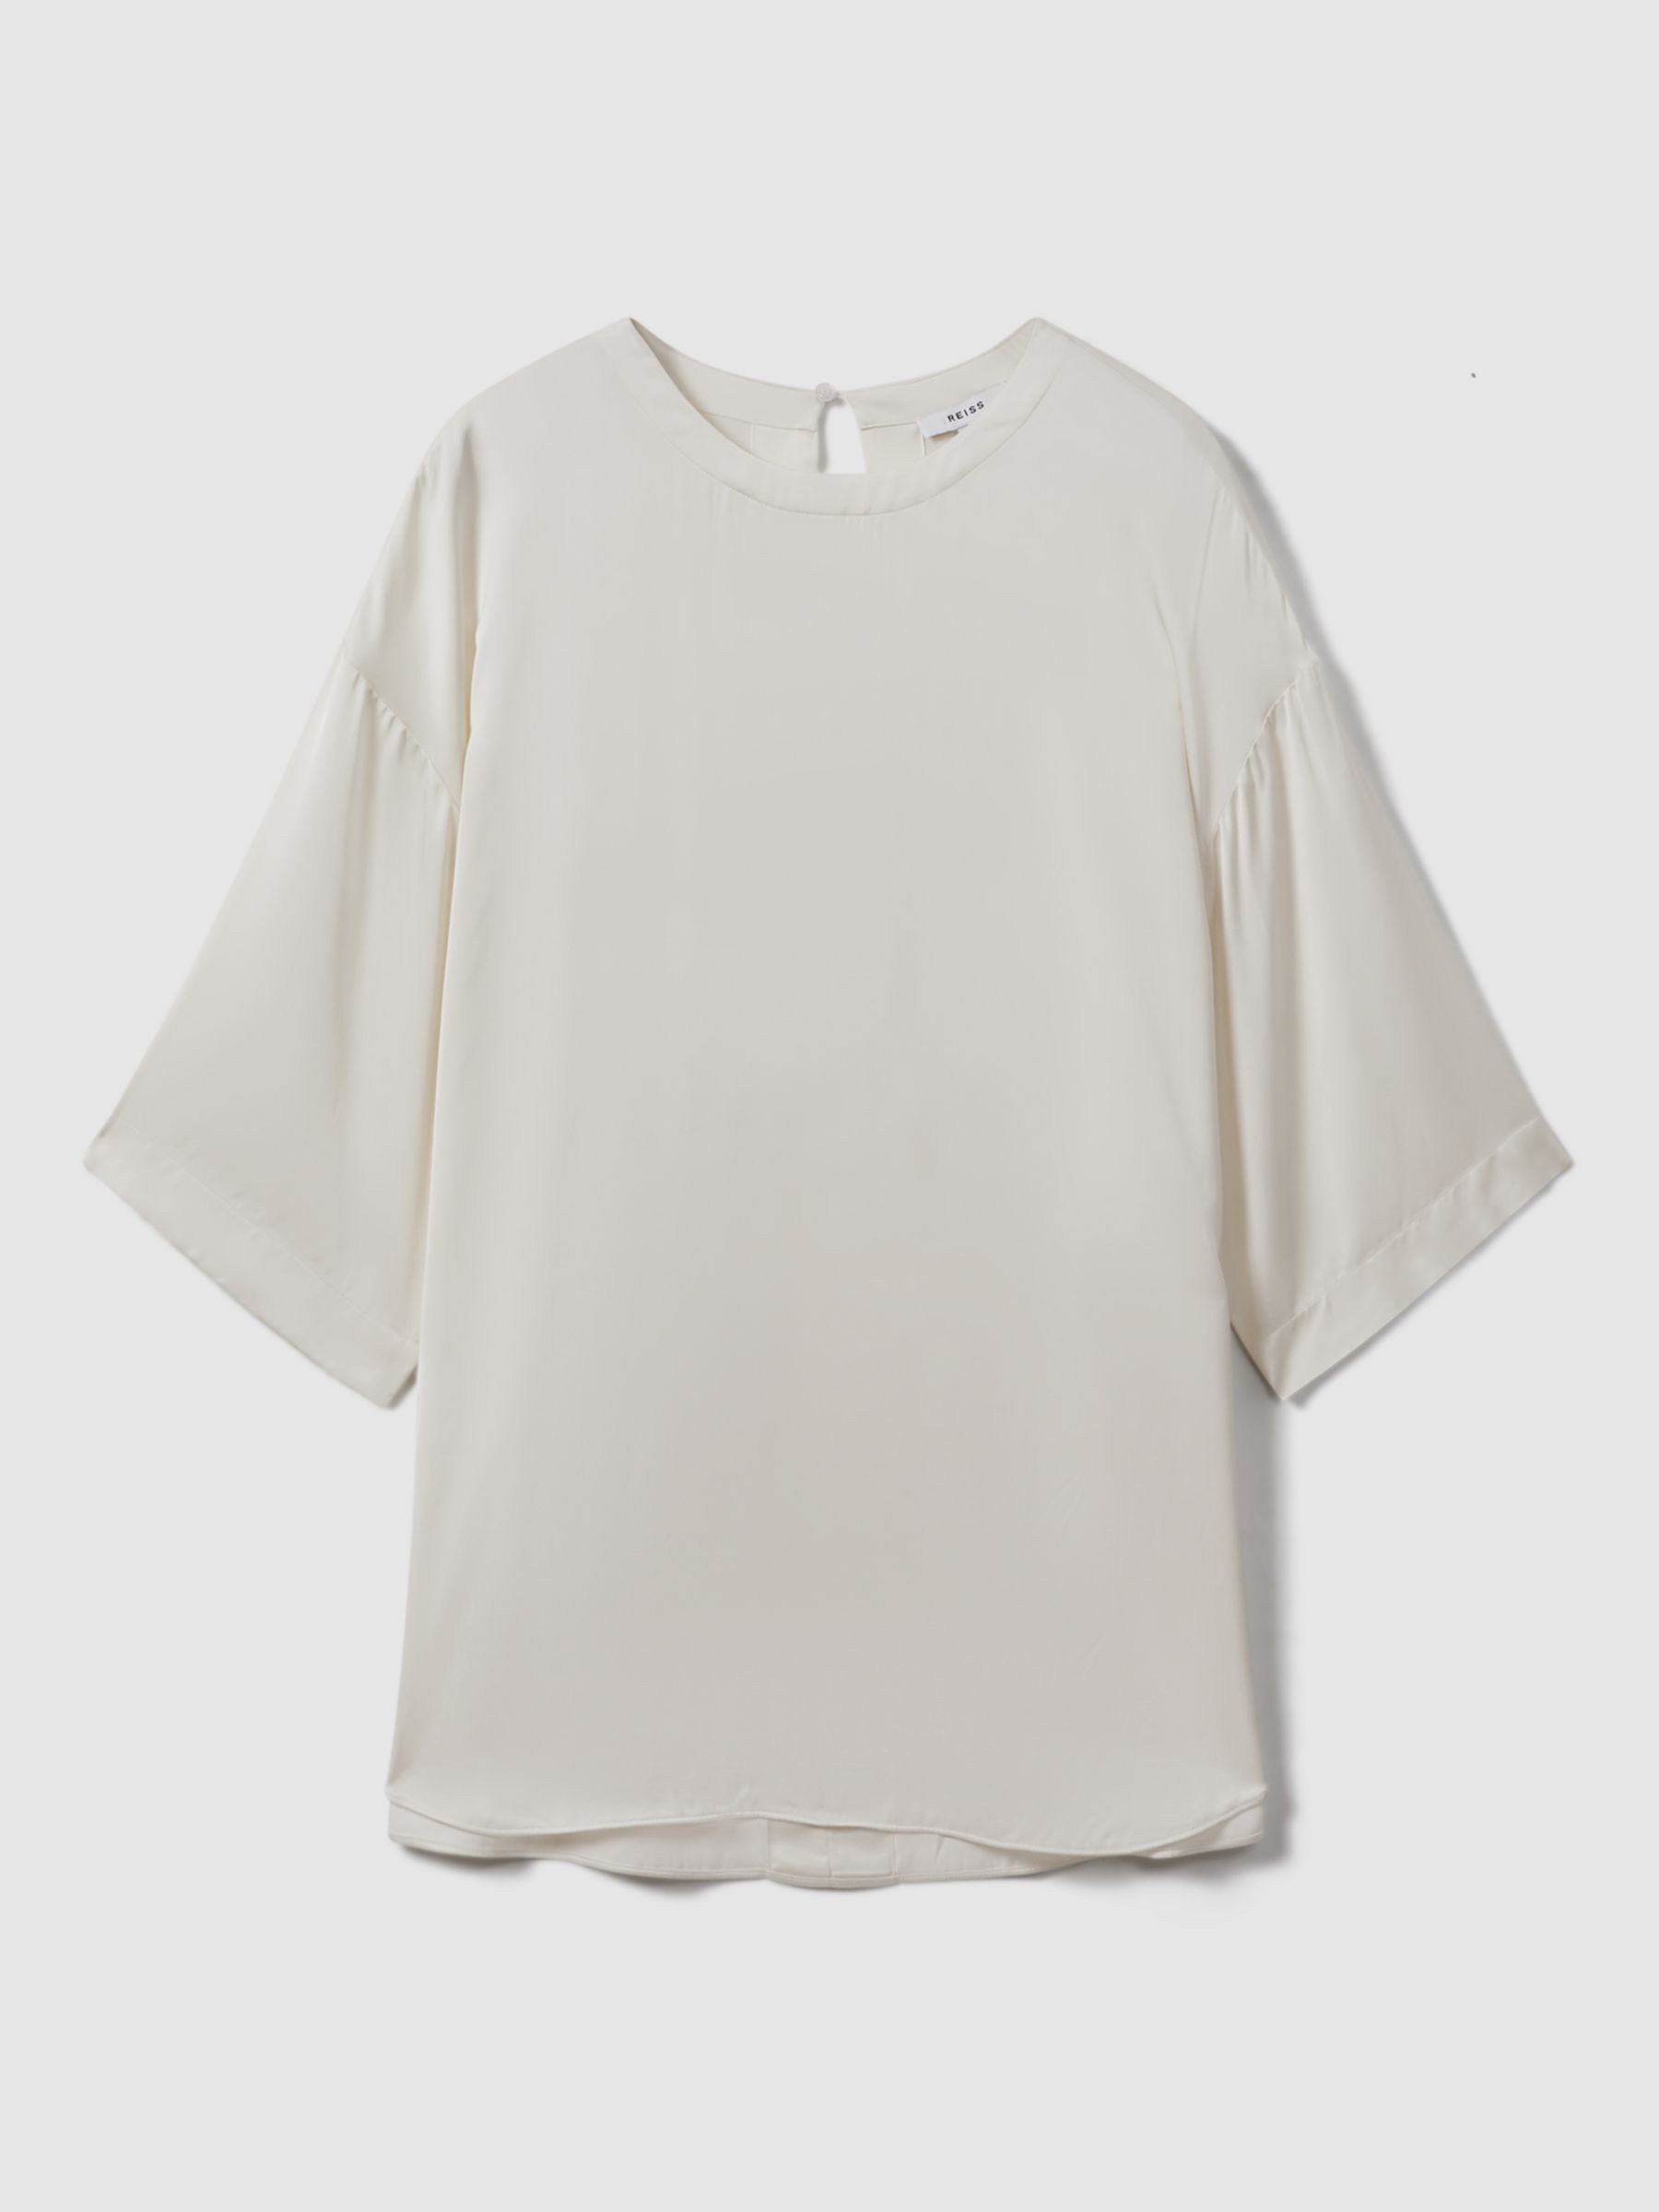 Buy Reiss Anya Relaxed Satin Blouse Online at johnlewis.com